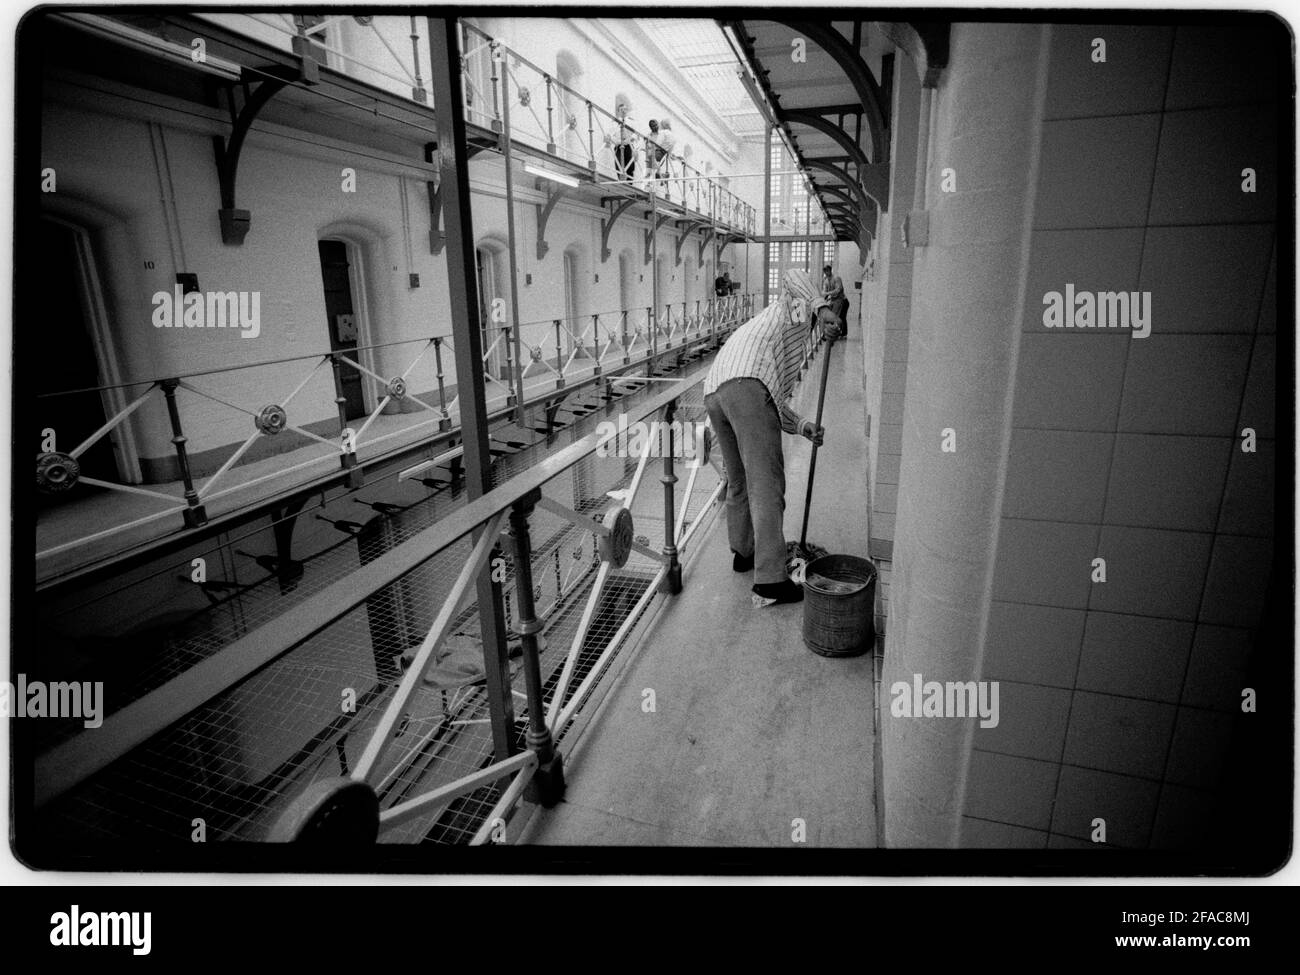 Hull Prison July 1990 Scan made in 2021 Cleaning the wing. HM Prison Hull last prison in the UK to have ‘slopping out’. This was the reason that the photographer was allowed in to document. Pictures taken with permission. Hull Prison opened in 1870, and is of a typical Victorian design HMP Hull is a Category B men's local prison located in Kingston upon Hull in the East Riding of Yorkshire, England. The term 'local' means that this prison holds people on remand to the local courts. The prison is operated by Her Majesty's Prison Service. Stock Photo